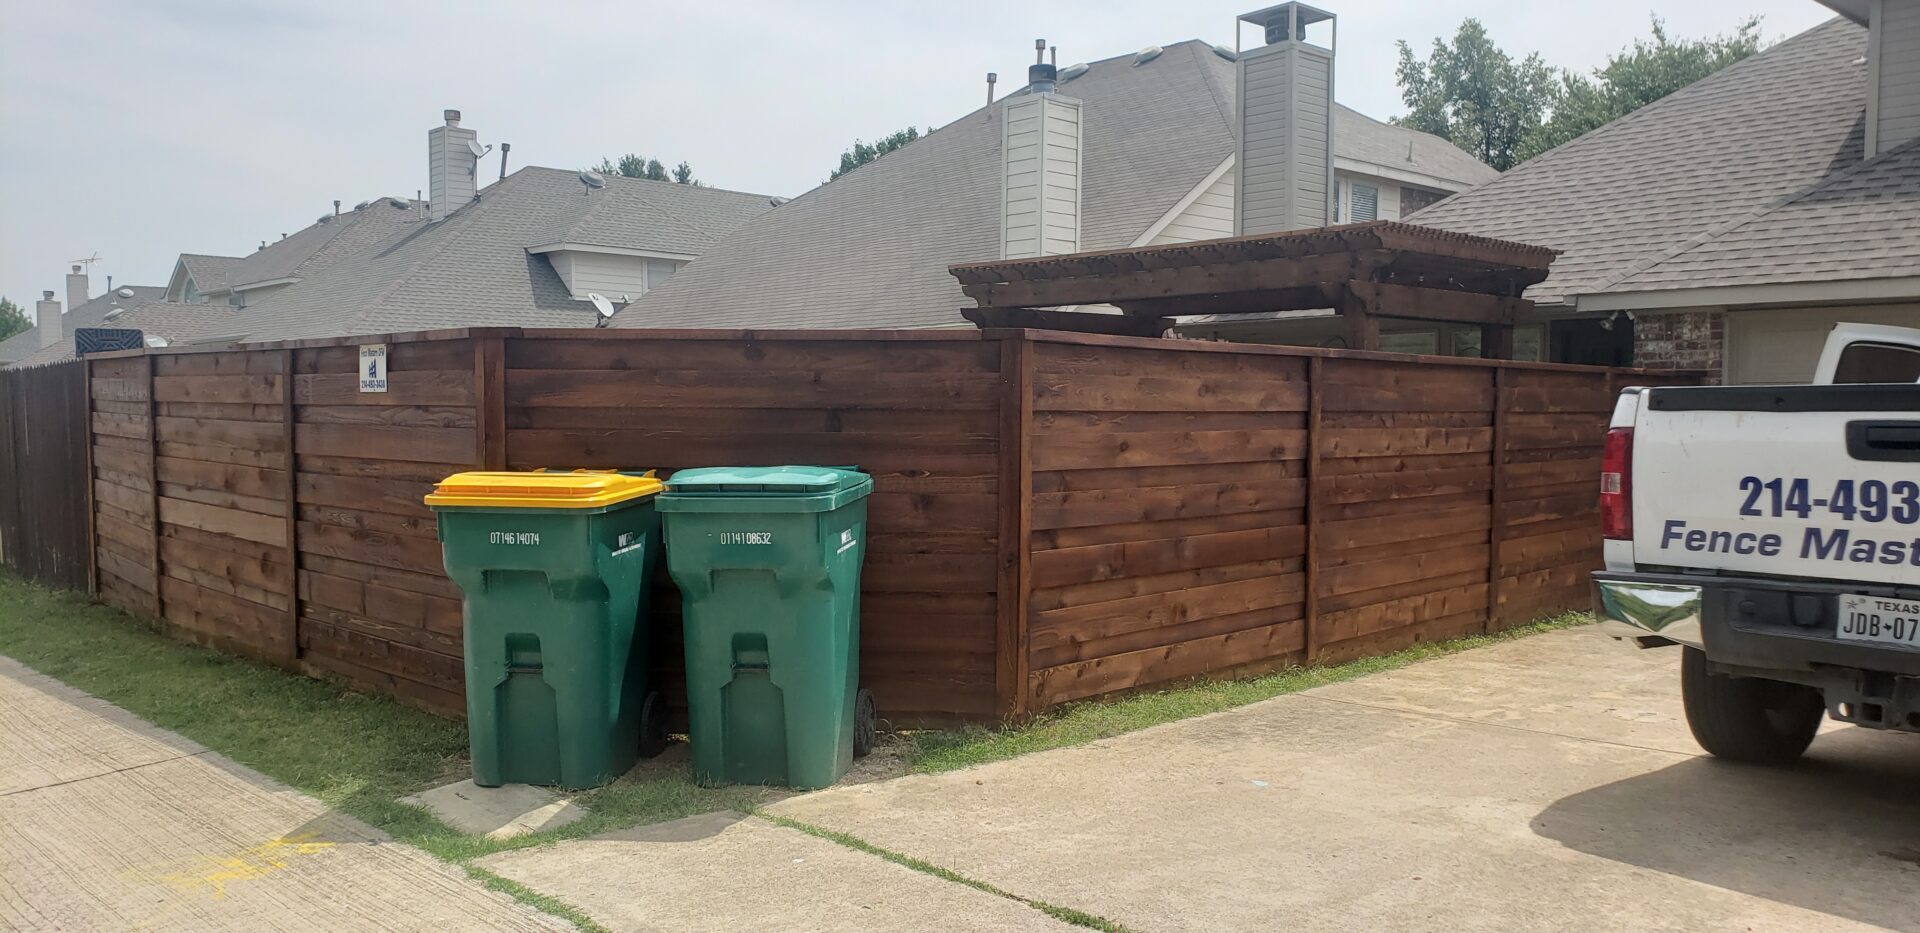 Two trash cans are next to a wooden fence.